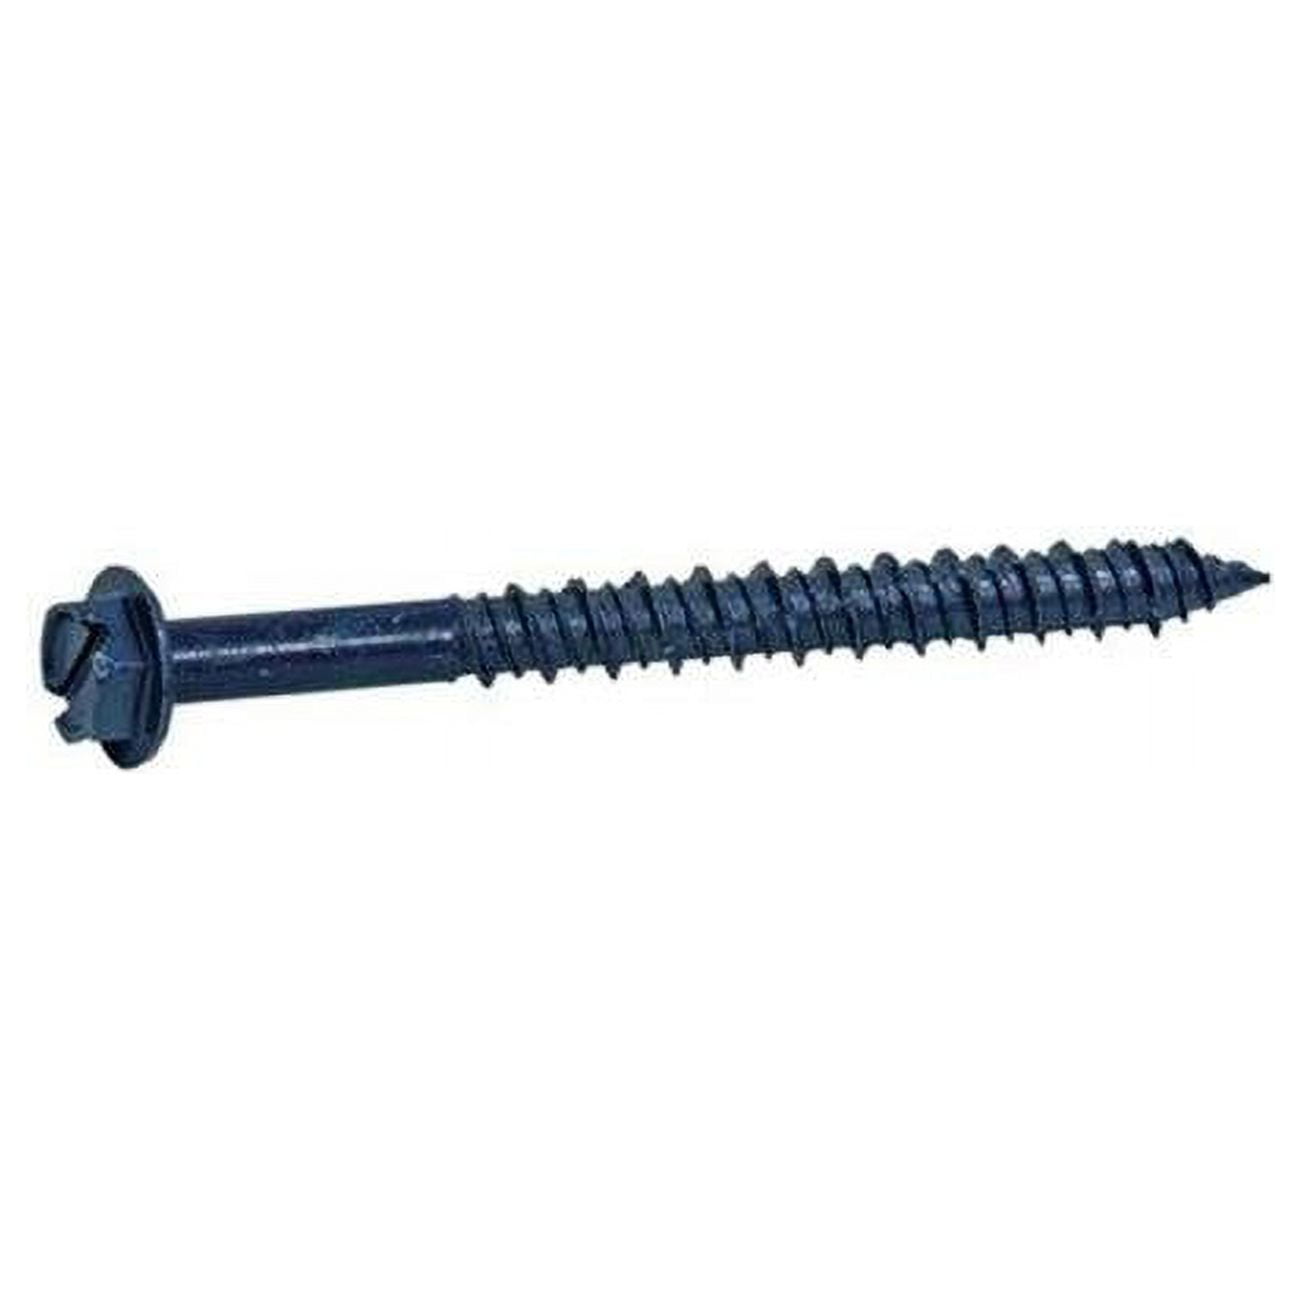 Picture of Grip-Rite 5025260 0.187 x 4 in. 1 lbs Hex Washer Head Steel Concrete Screws